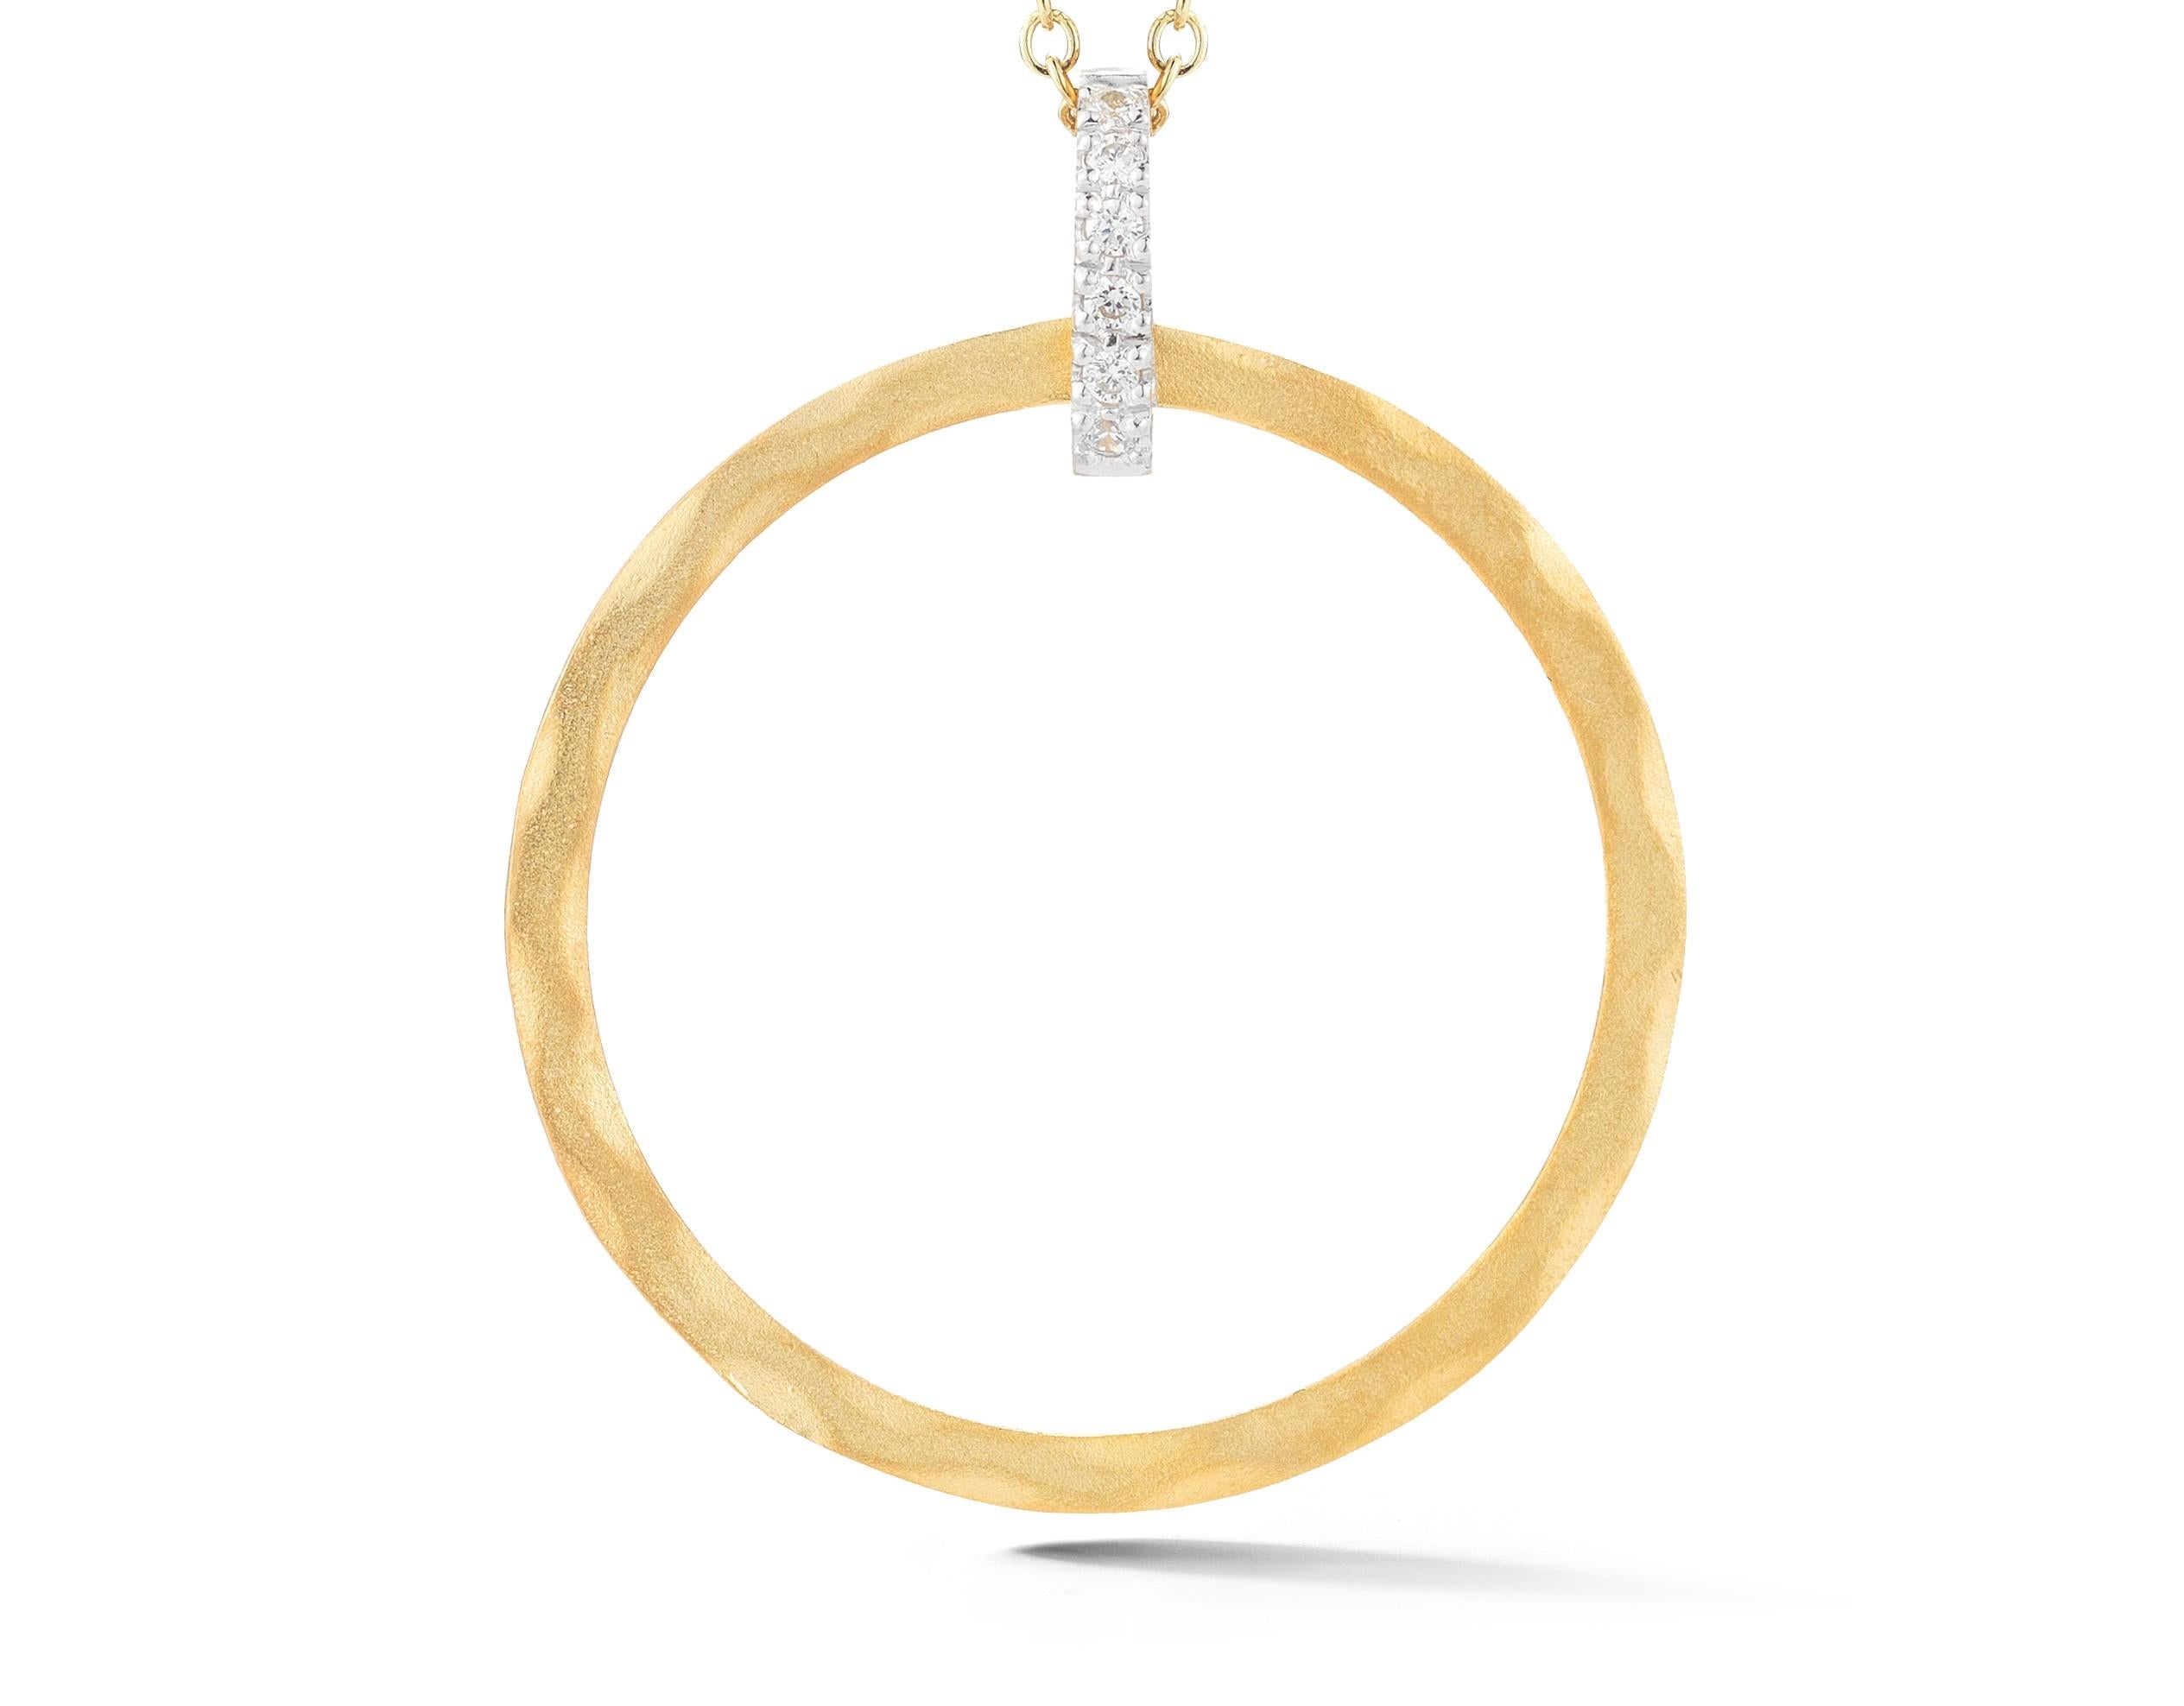 14 Karat Yellow Gold Hand-Crafted Matte and Hammer-Finished 25mm Open Circle Pendant, Accented with 0.06 Carats of Pave Set Diamonds, Sliding on a 16